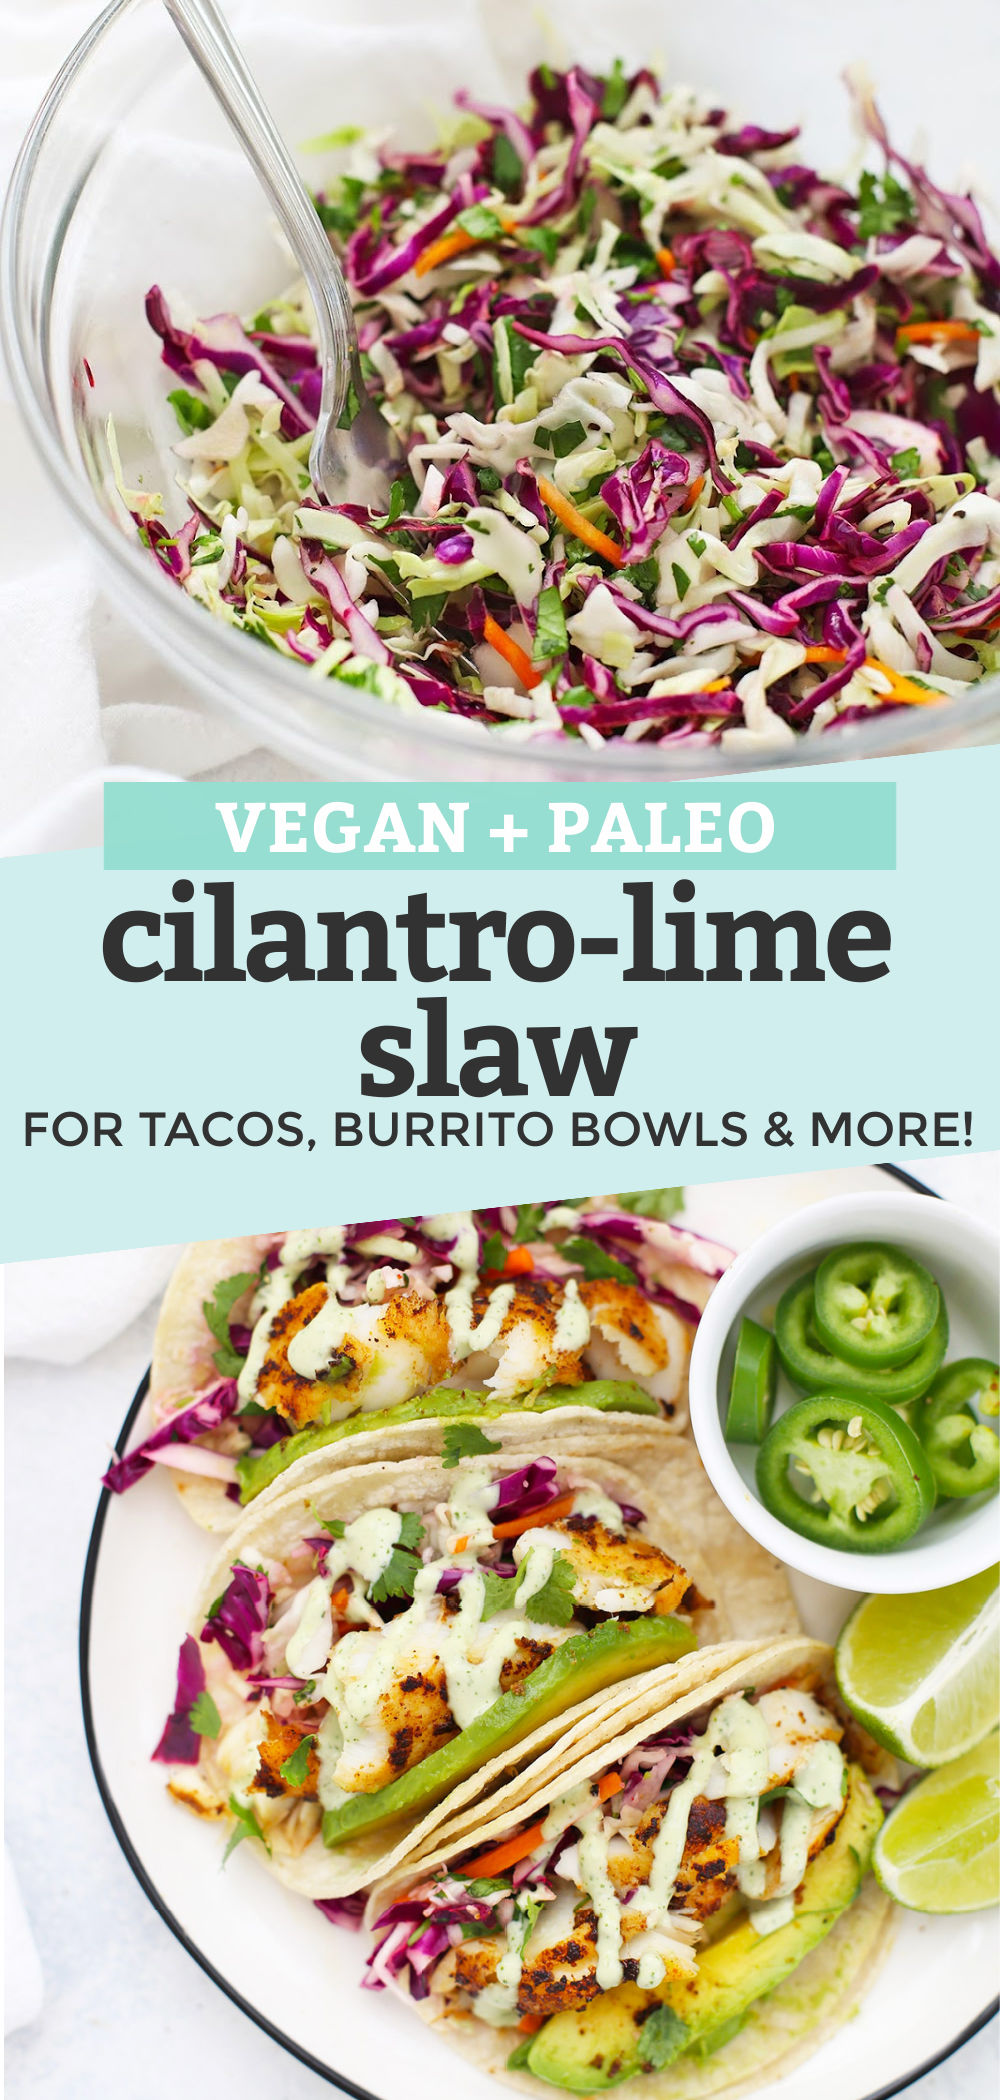 with text overlay that reads "Vegan + Paleo Cilantro Lime Slaw. Perfect for tacos, burrito bowls, and more!"